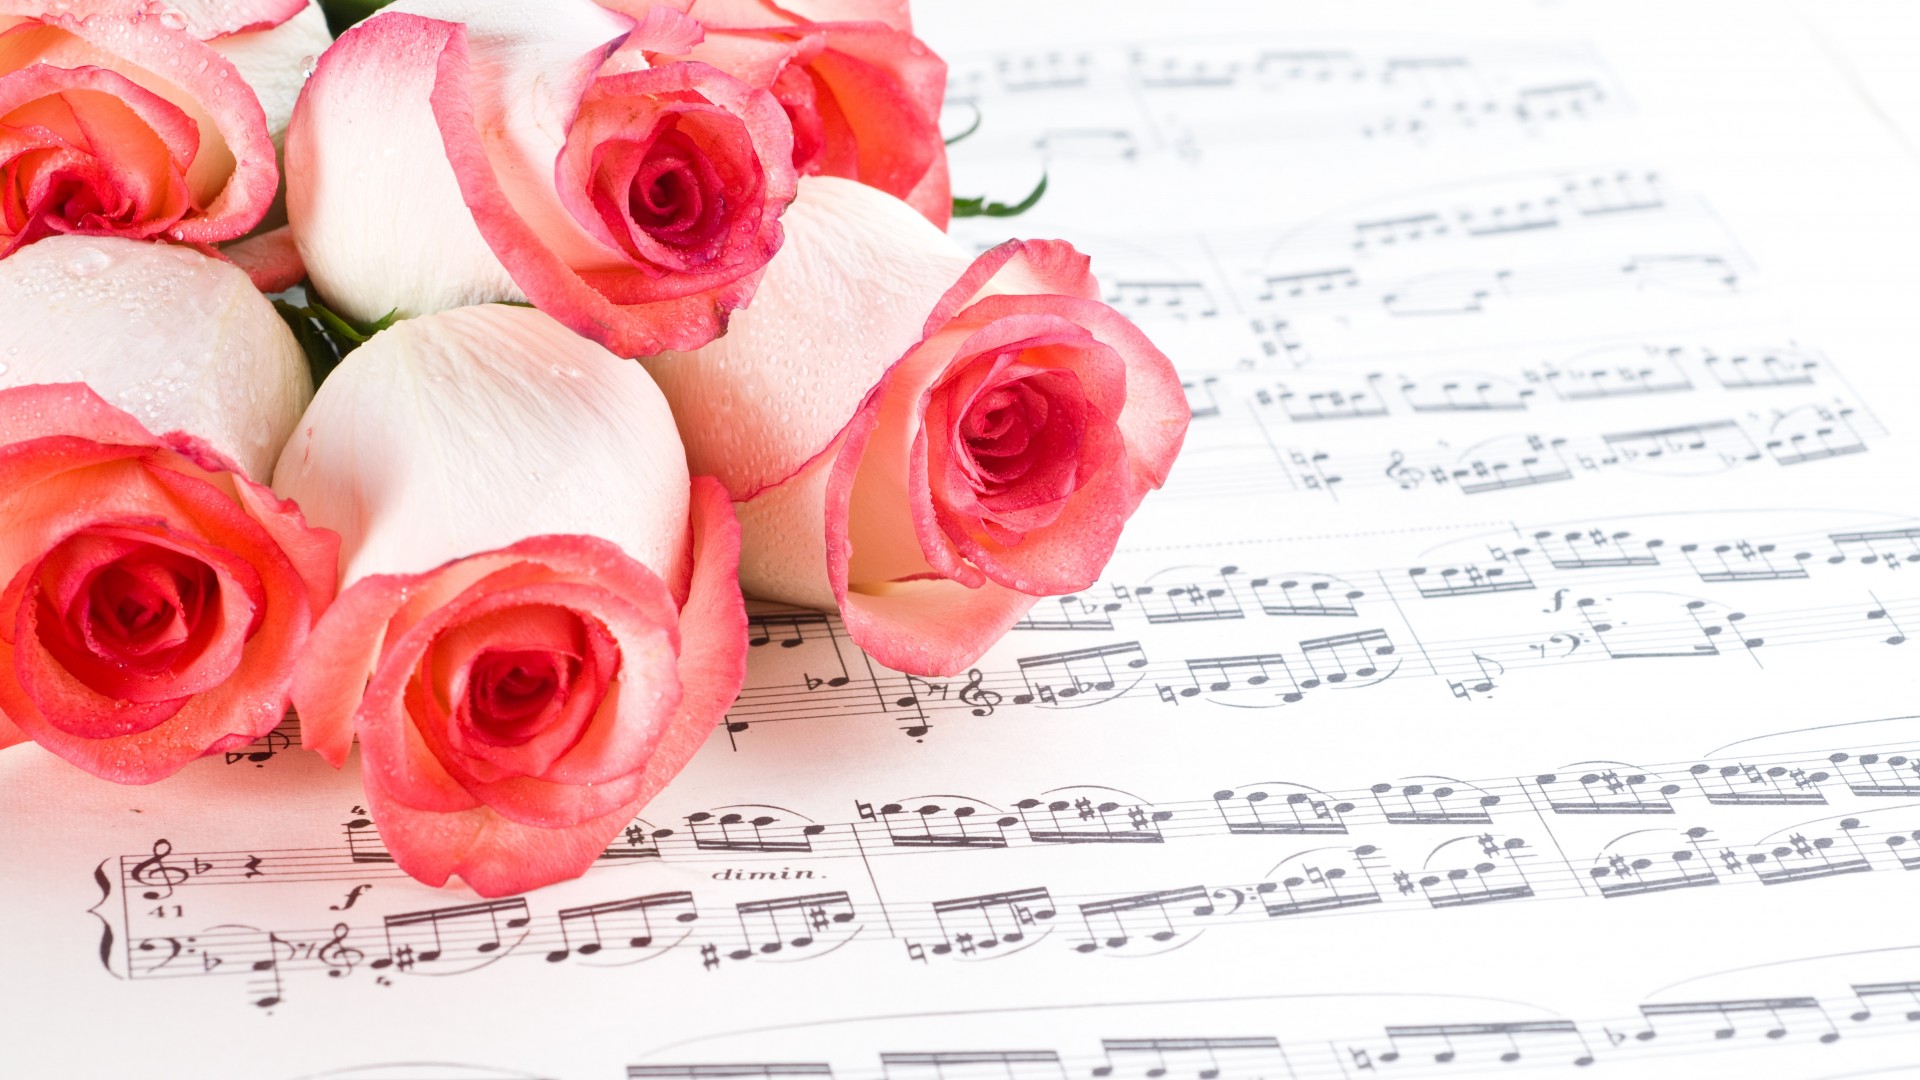 music, Notes, Sheet, Paper, Flowers, Roses, Mood Wallpaper